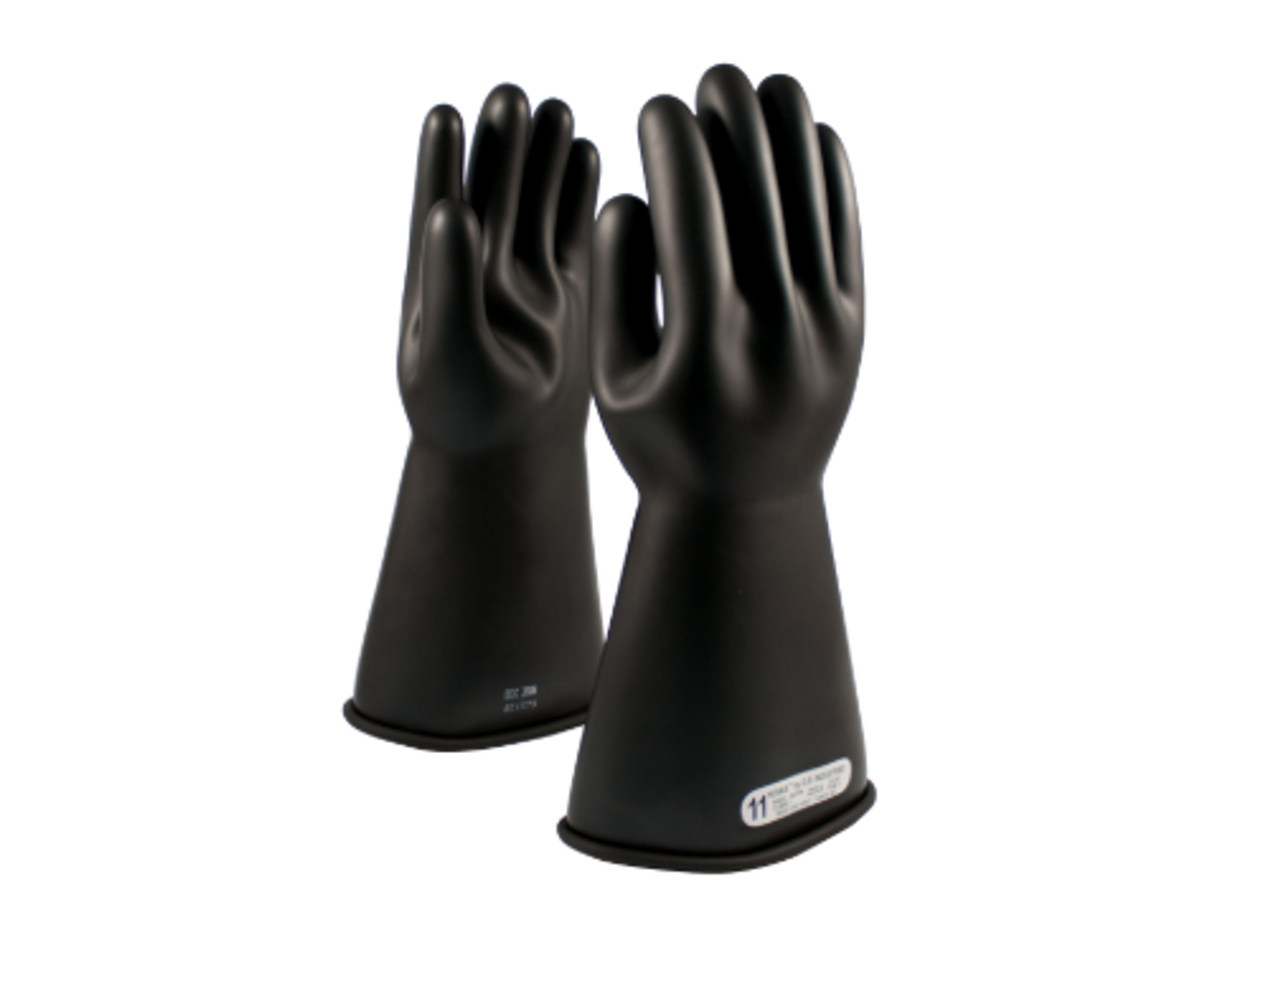 https://cdn11.bigcommerce.com/s-y4b1n34/images/stencil/1280x1280/products/3638/5846/PIP_Class_1_Black_Gloves__07080.1598624855.PNG?c=2